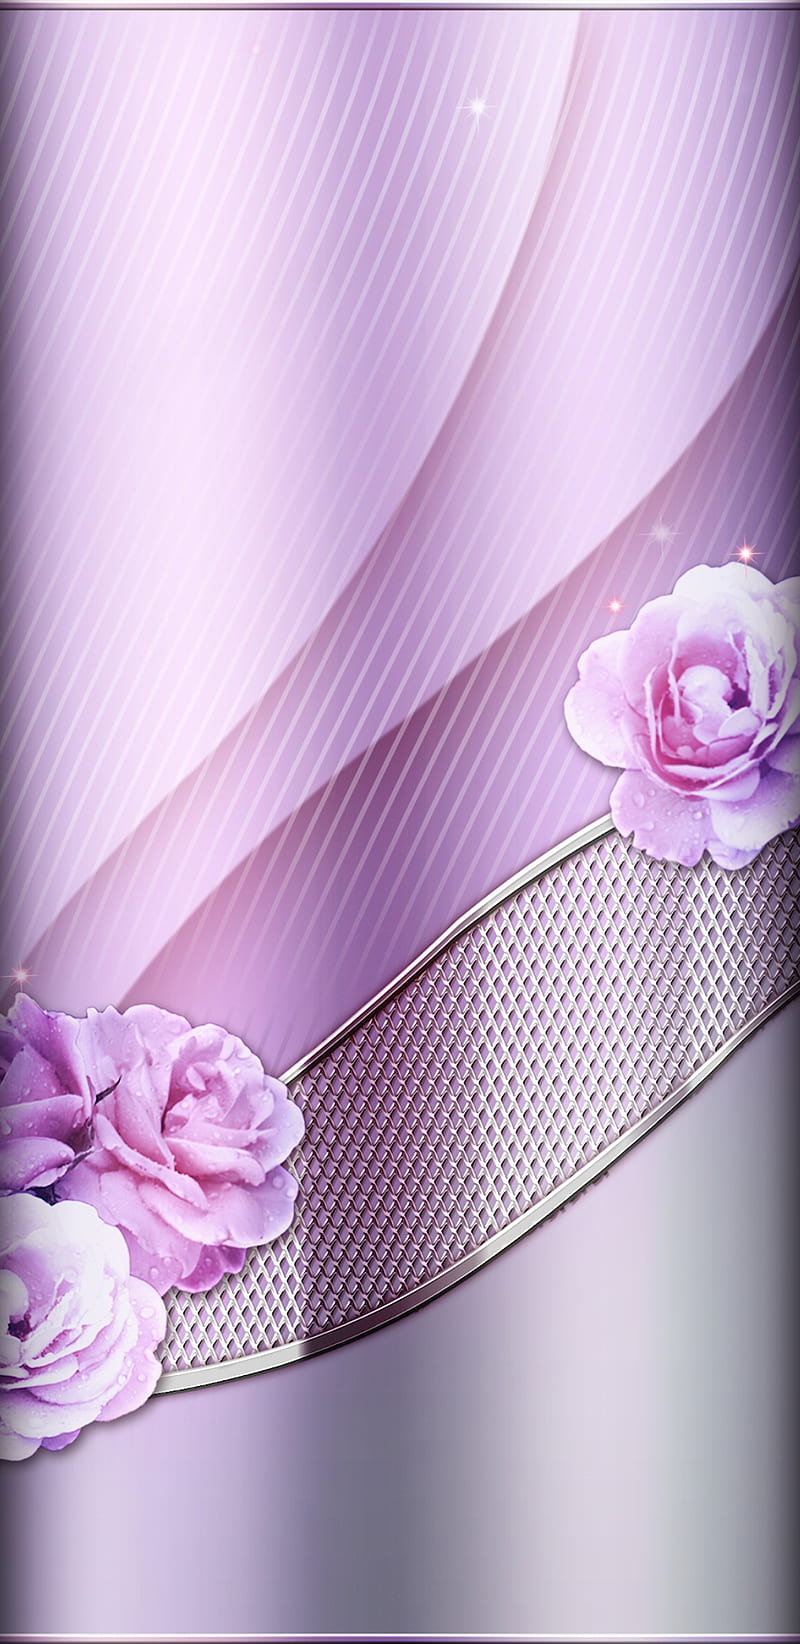 Divided Flowers, floral, flower, girly, pink, pretty, HD phone wallpaper